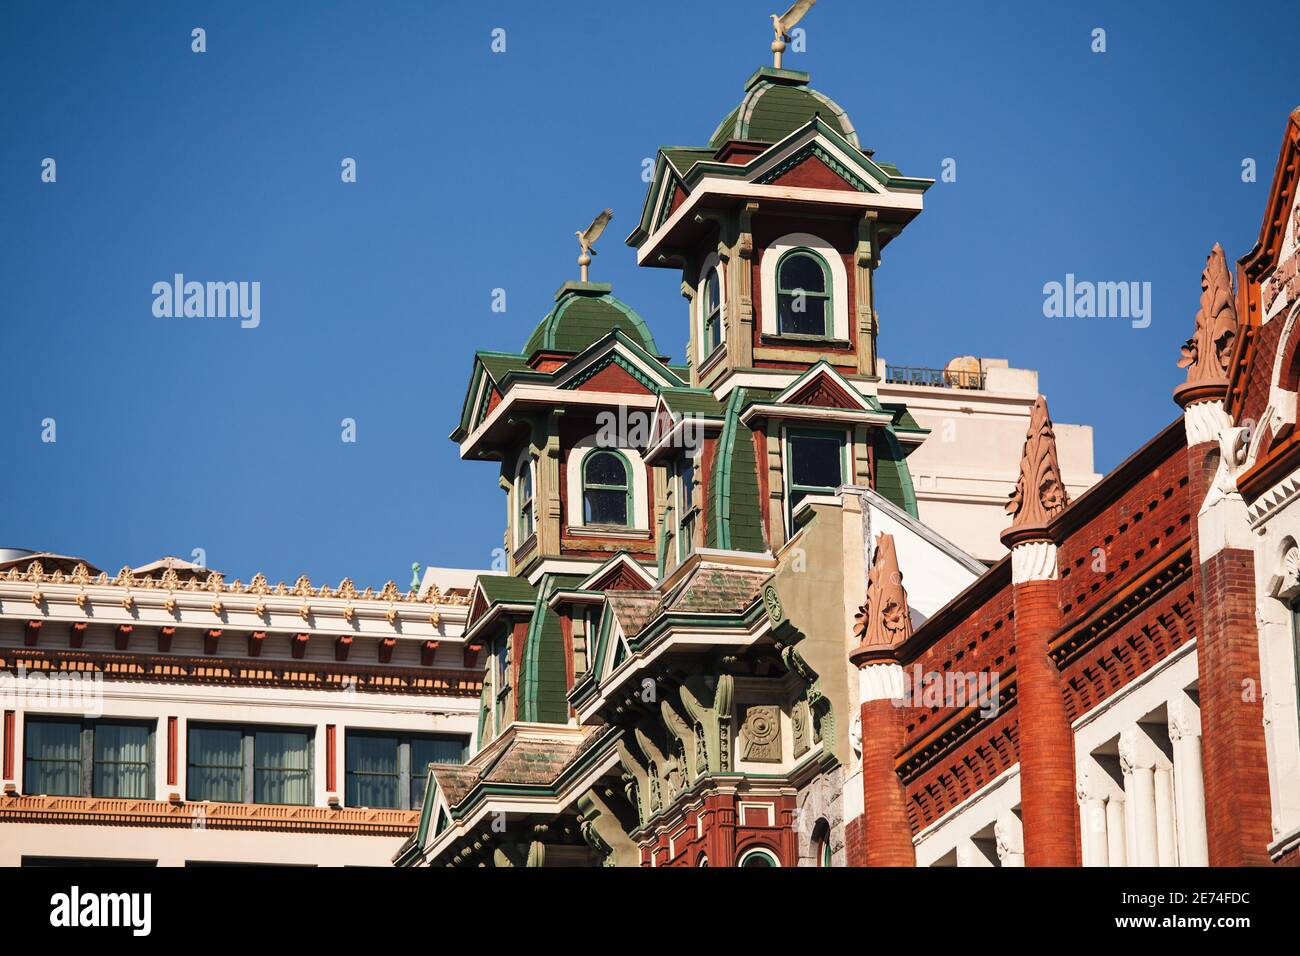 Modern city with different time period buildings next to each other. San Diego gaslamp disctrict Stock Photo